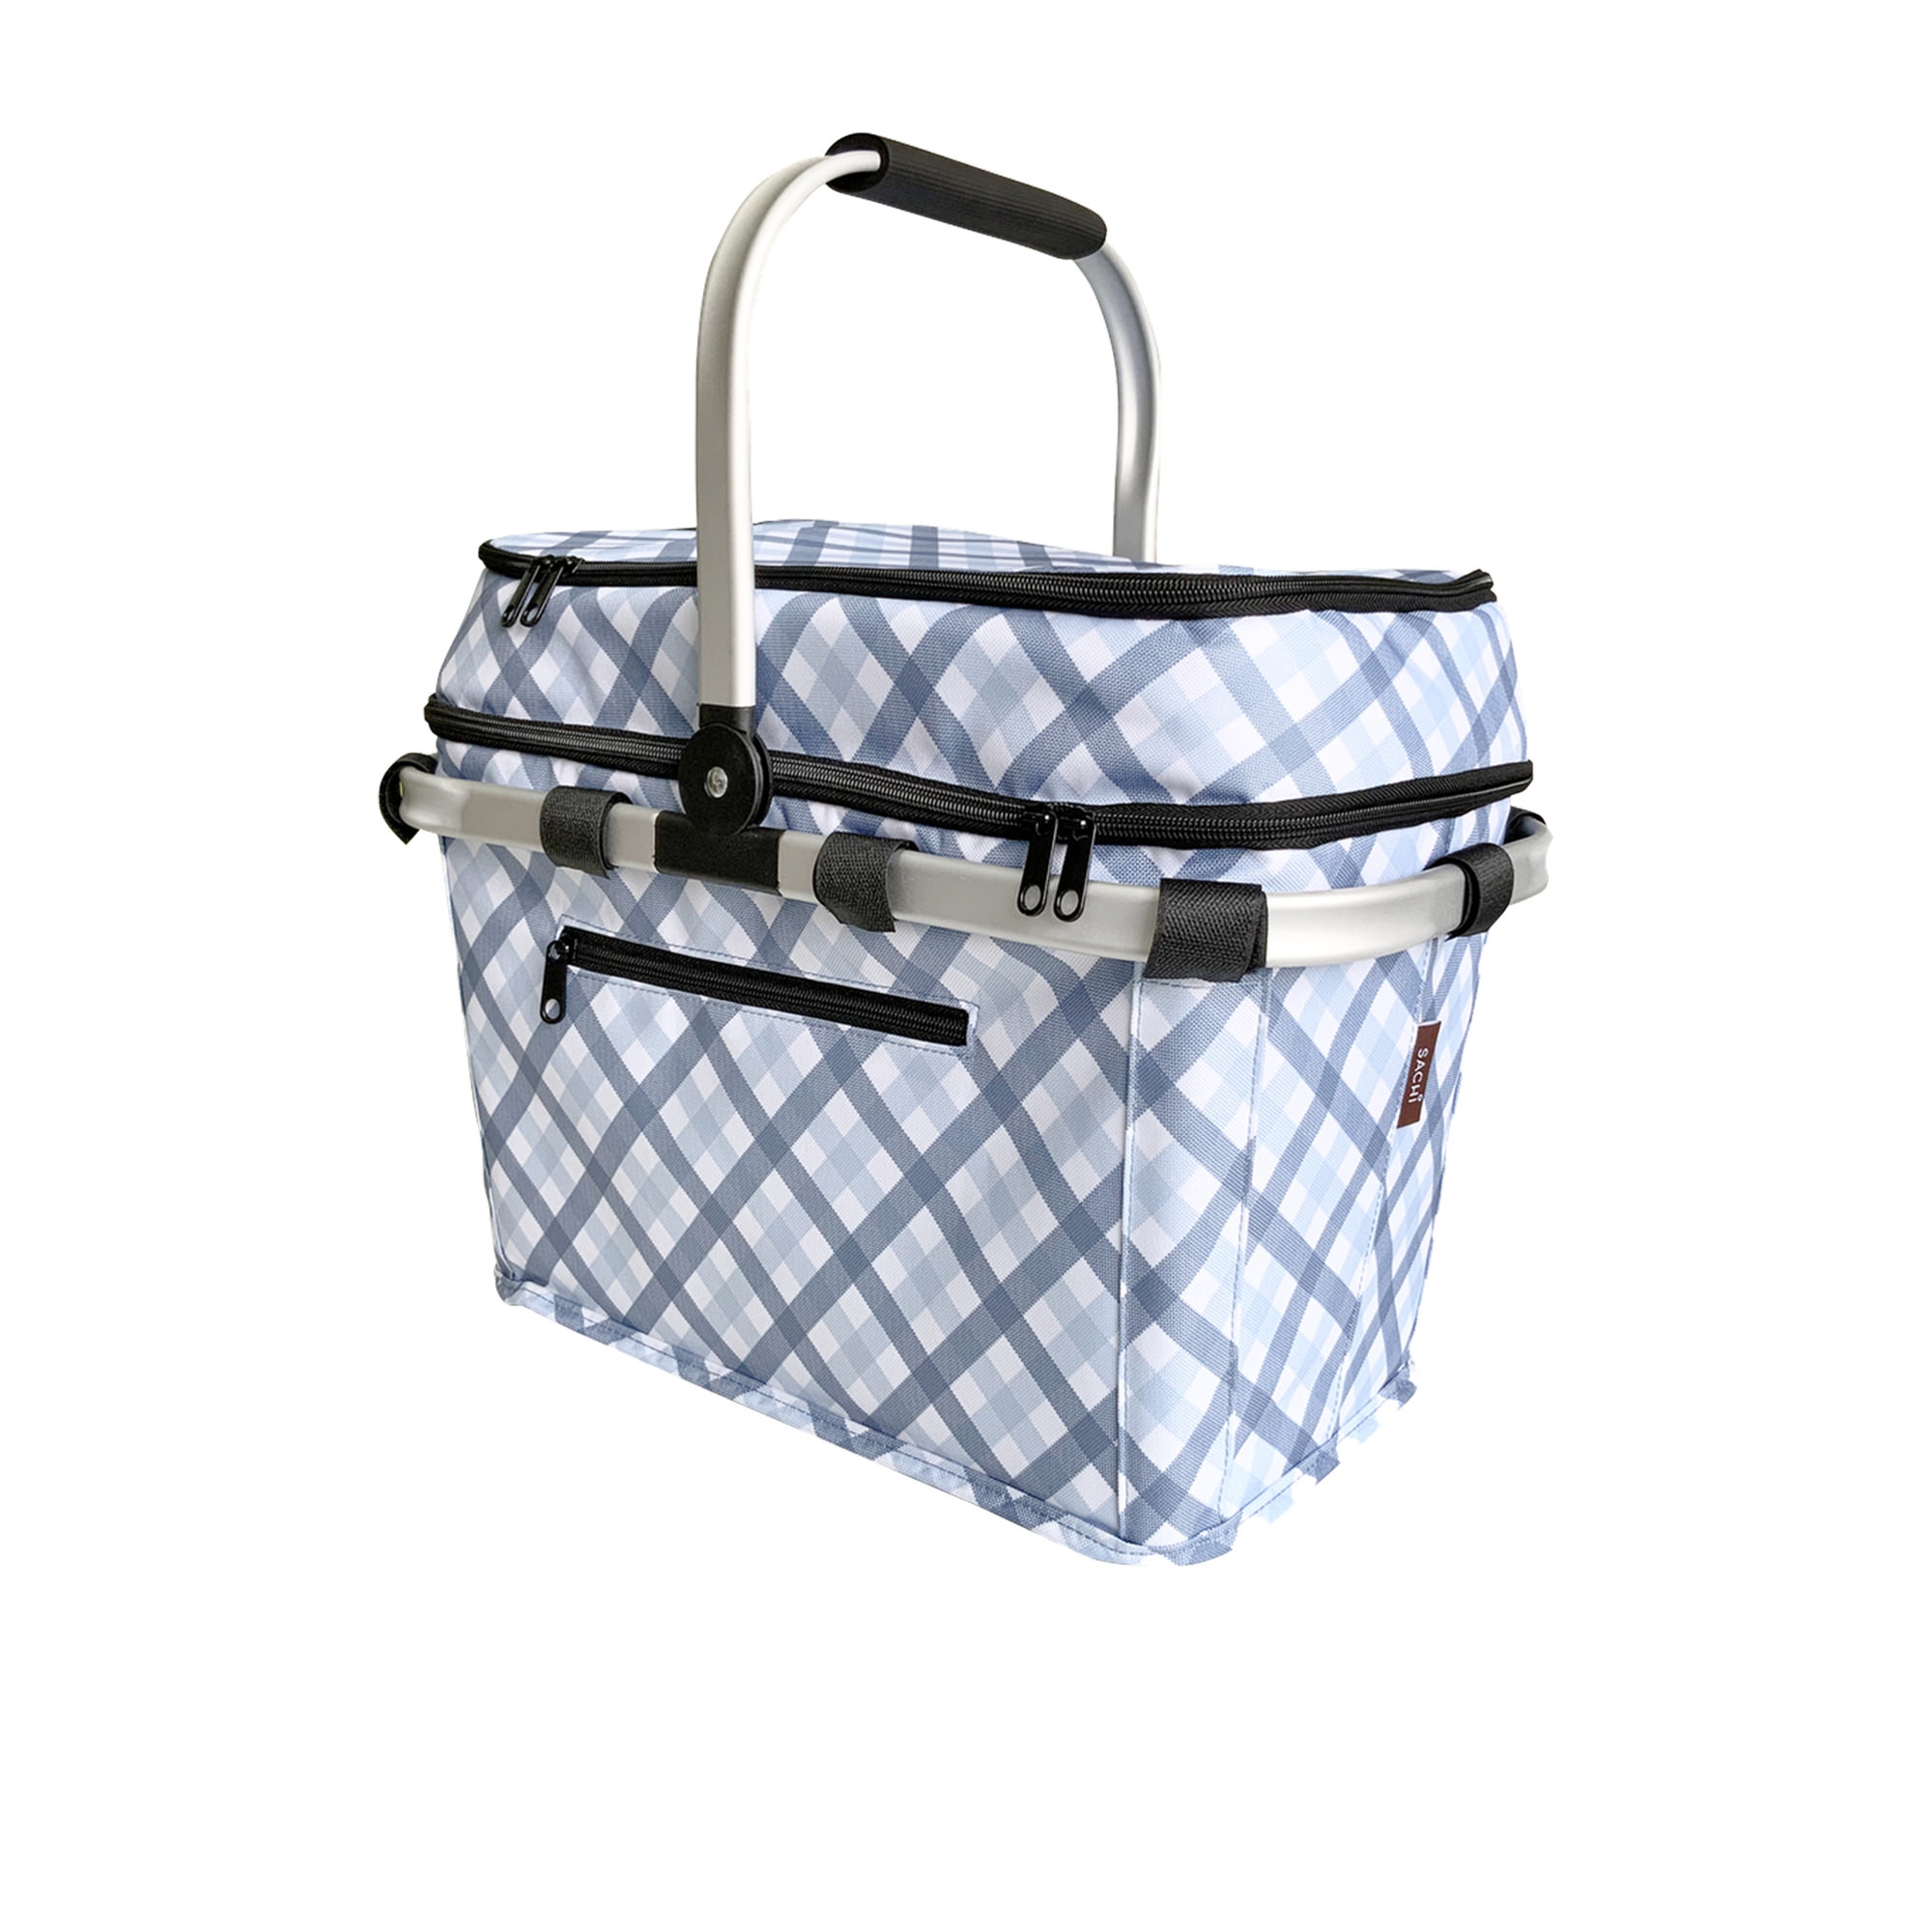 Sachi Fabric 4 Person Insulated Picnic Basket Blue Gingham Image 1